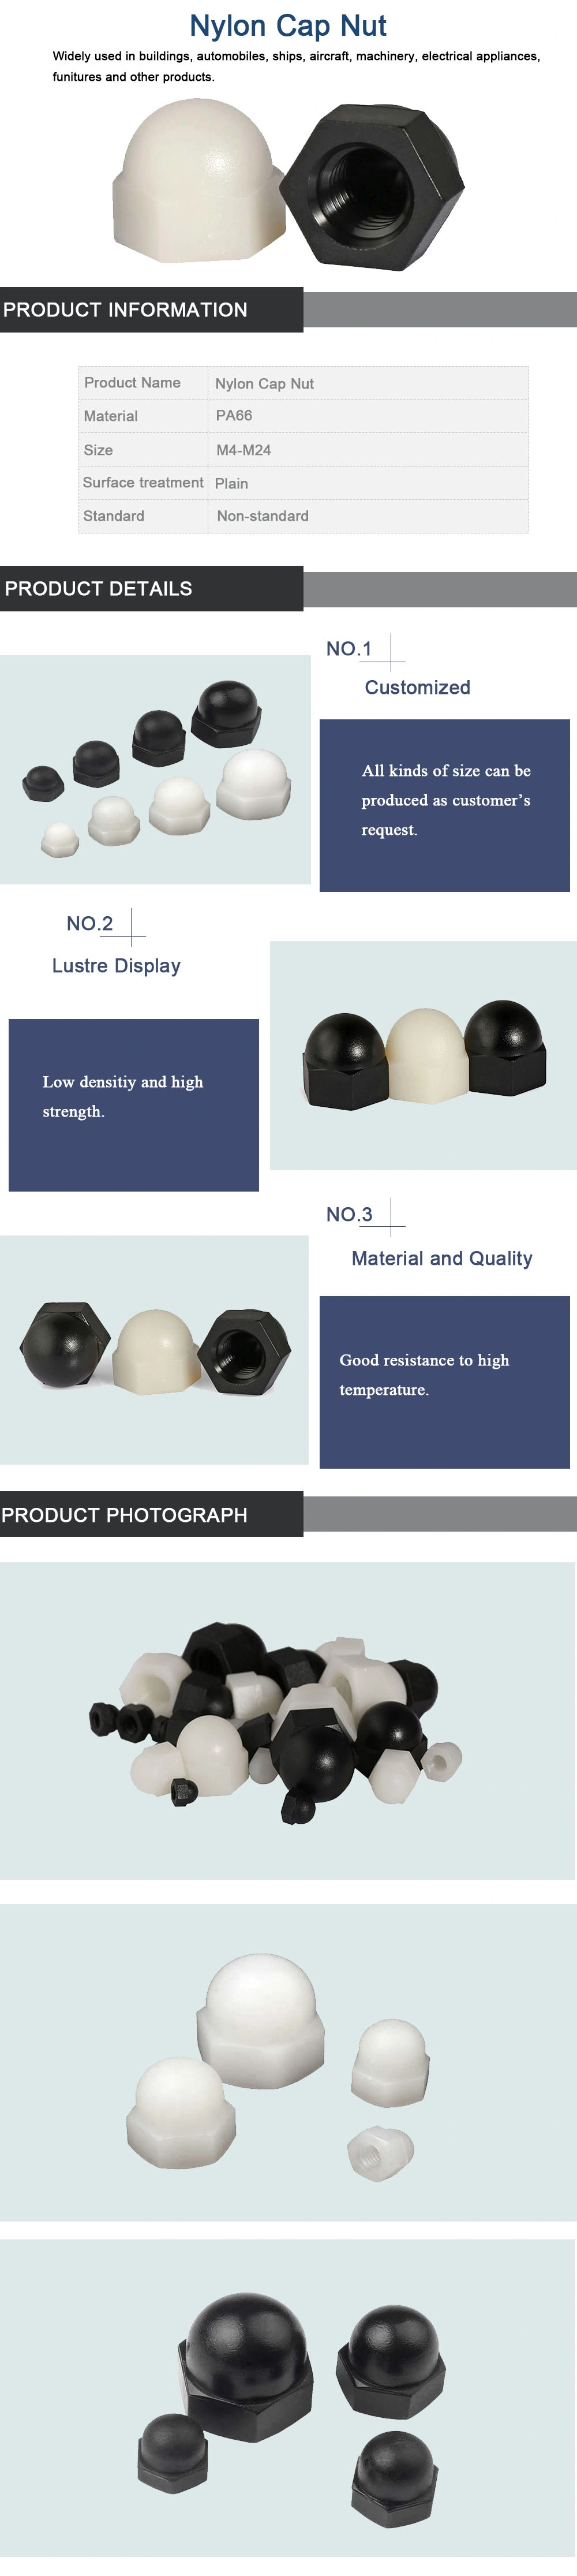 Customized Hexagon Slotted Plastic PA66 Nylon Castle Nut Cap Nut Hexagon Acorn Nut Domed Cap Nut Lock Nut Bolt and Nut Thick Nut Made in China